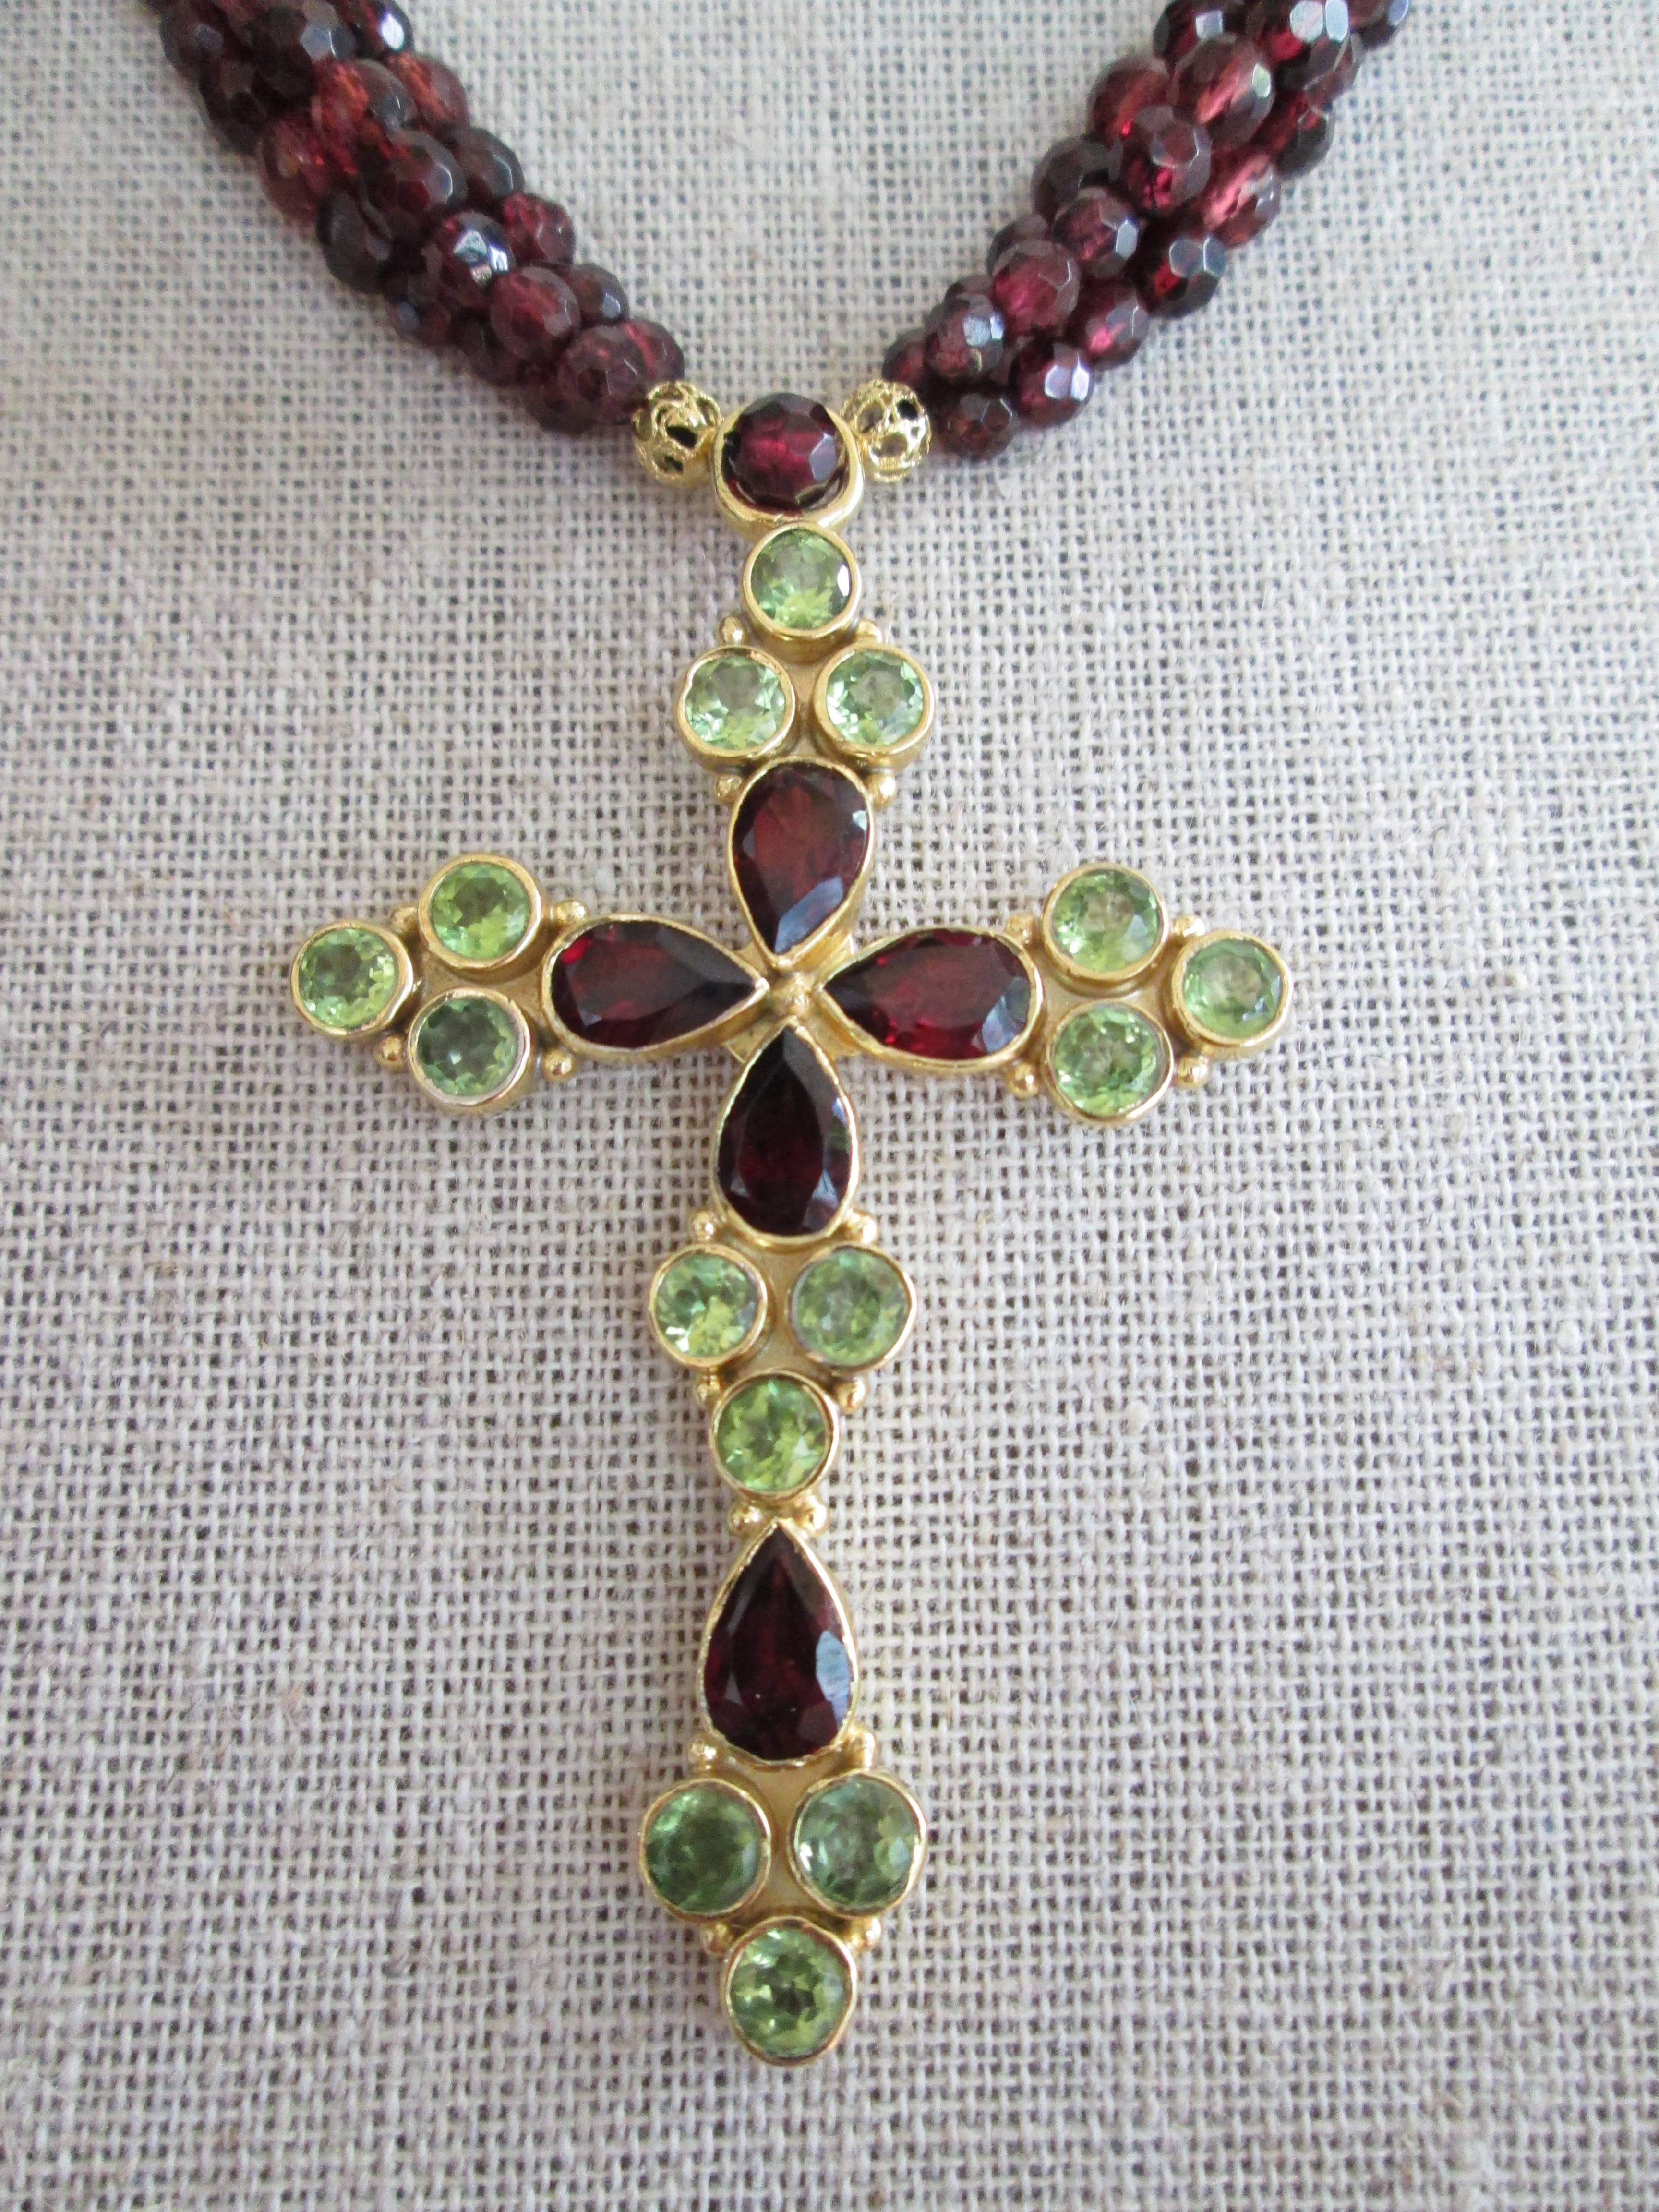 Romantic Faceted Garnet Bead Necklace with Peridot and Garnet Gold-Plated Silver Cross